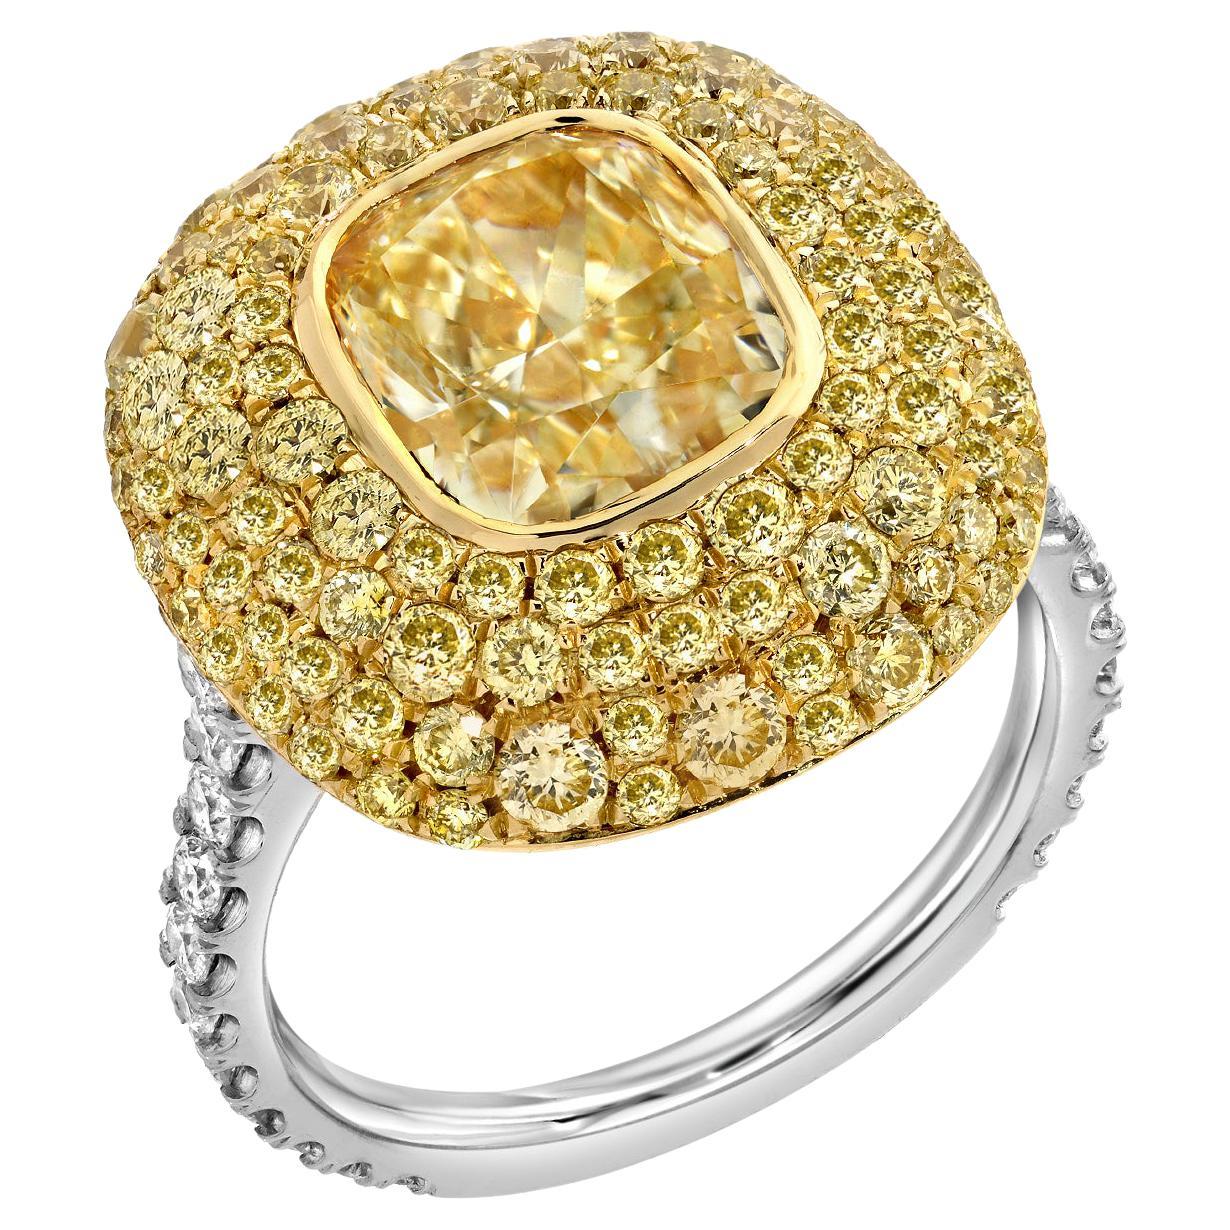 Fancy Light Yellow Diamond Ring 3.01 Carat GIA Certified For Sale